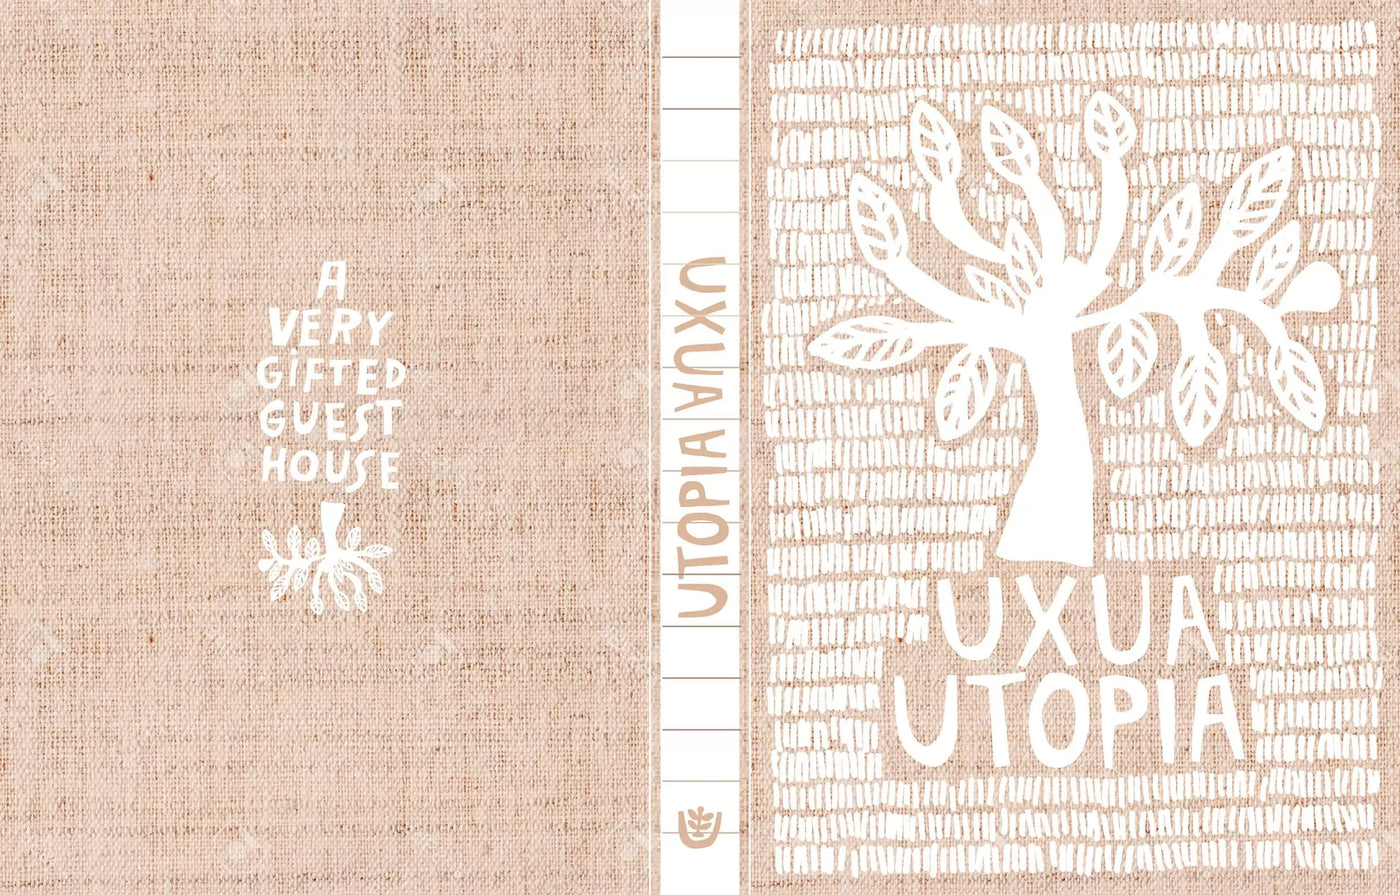 Book: Uxua Utopia, A very gifted guesthouse